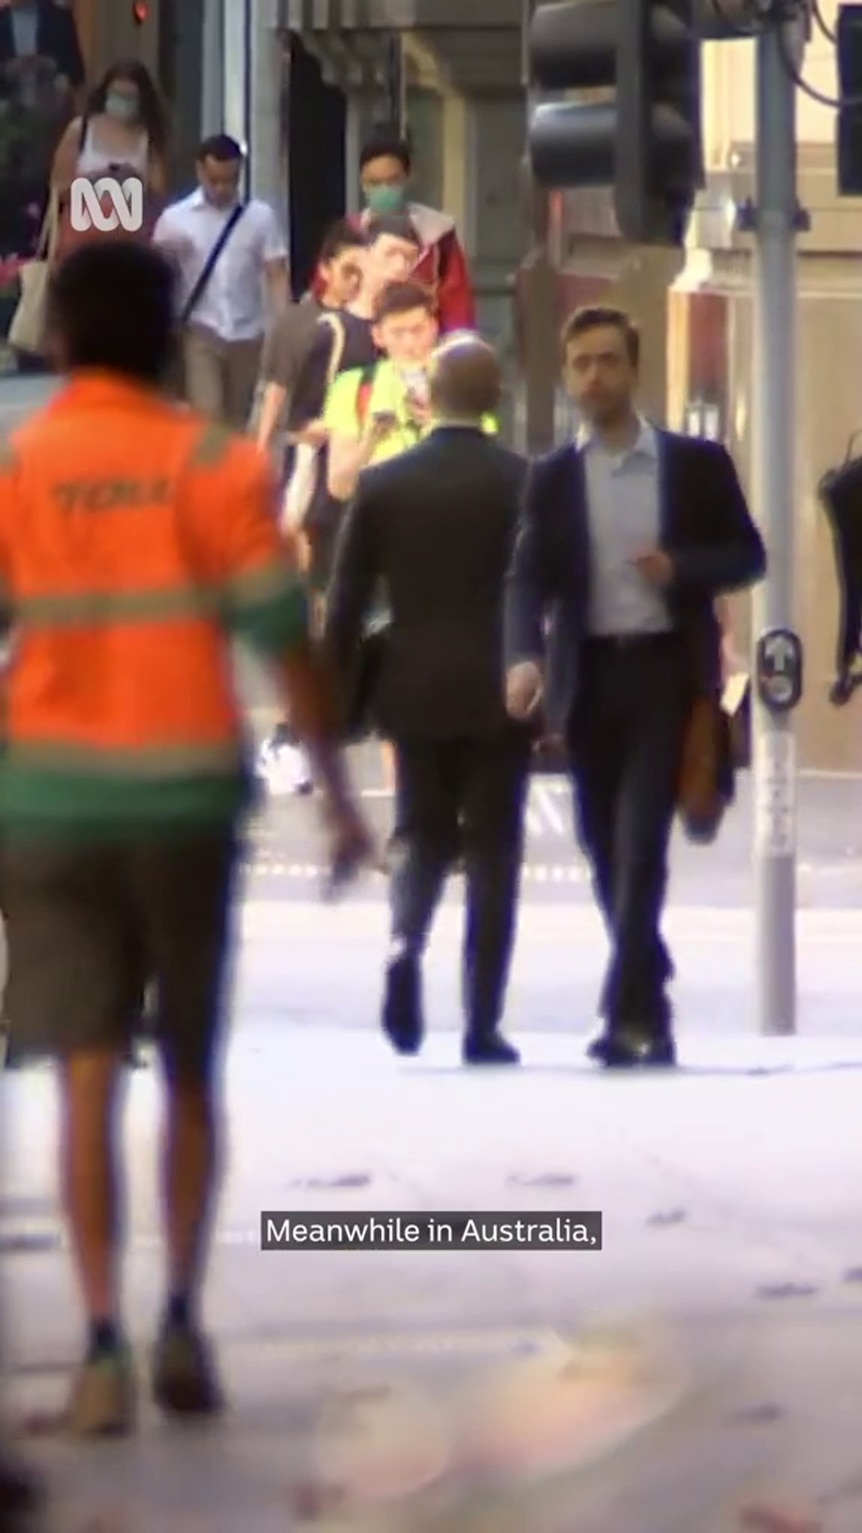 a variety of people walking through an urban environment, a traffic light is visible, somebody is wearing high-vis